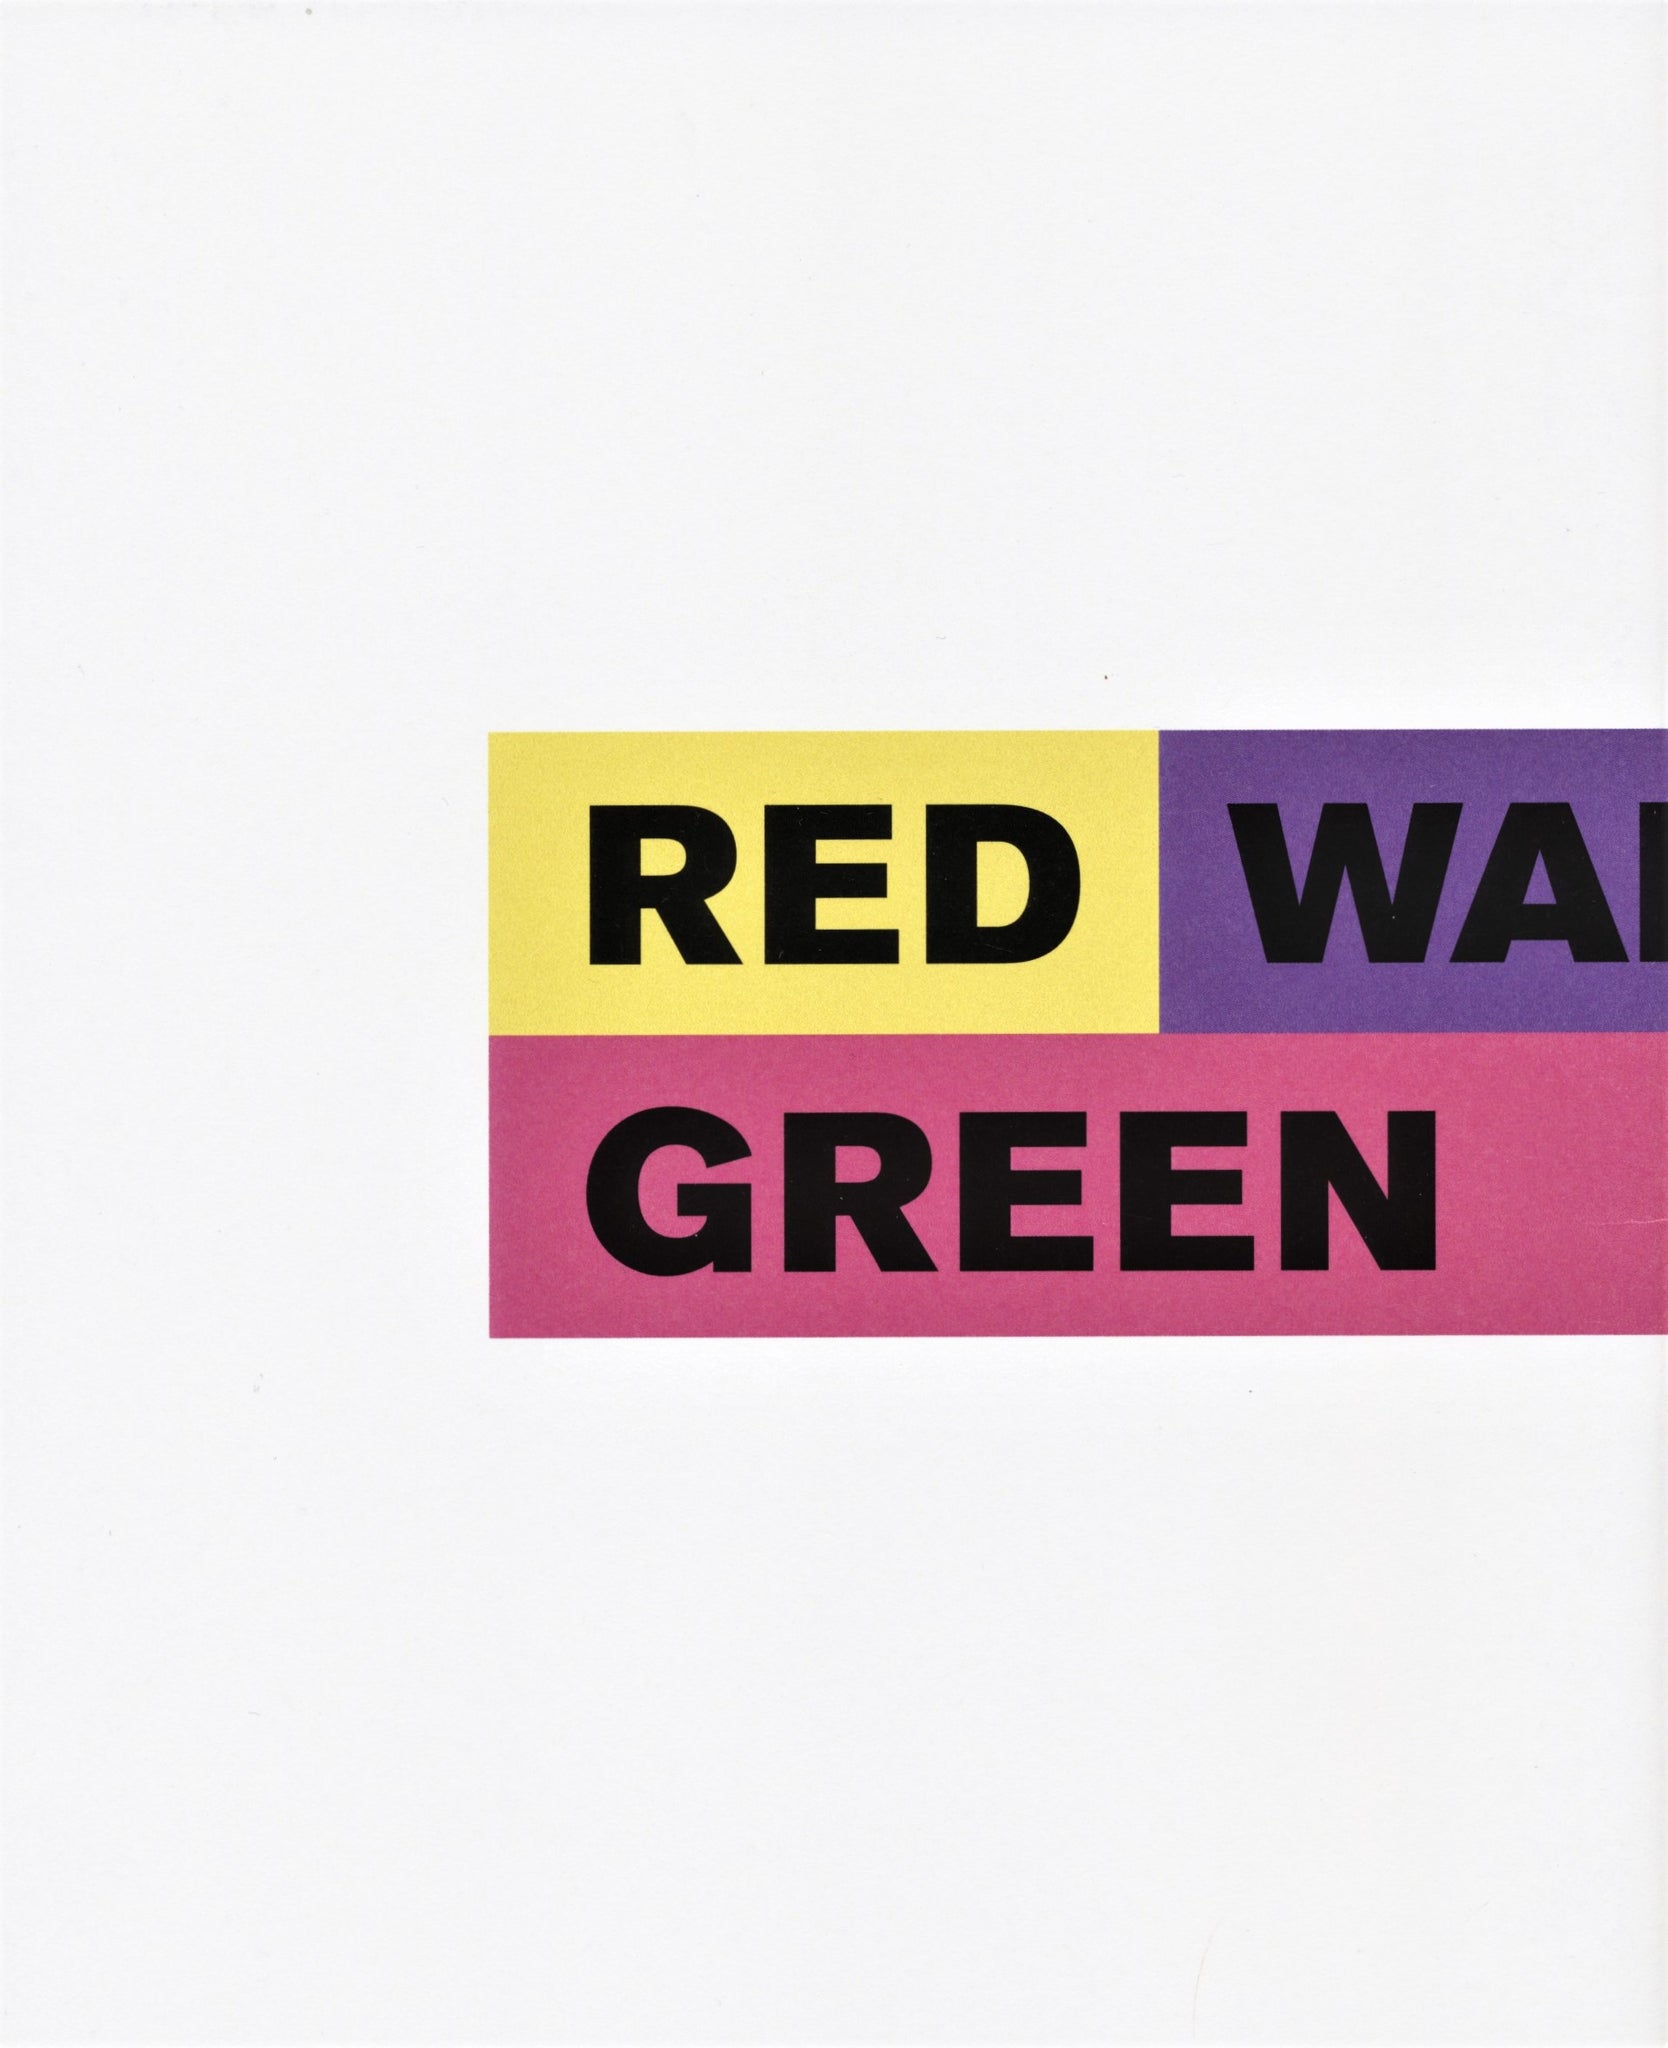 Red walks and green talks